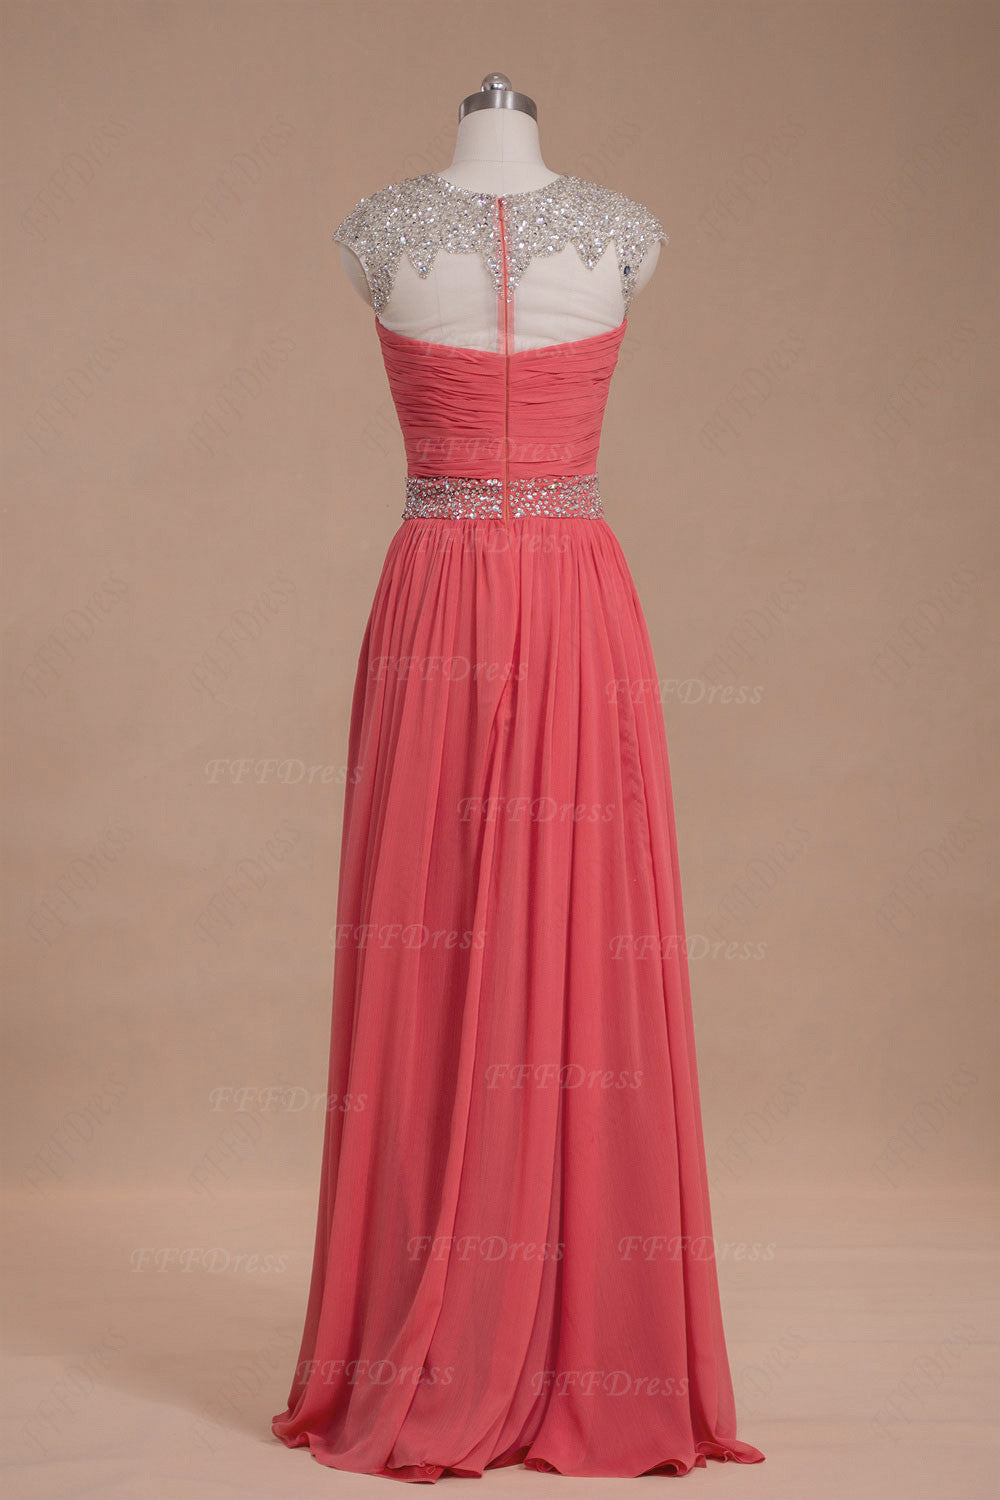 Modest Beaded Crystals Coral Prom Dresses Long